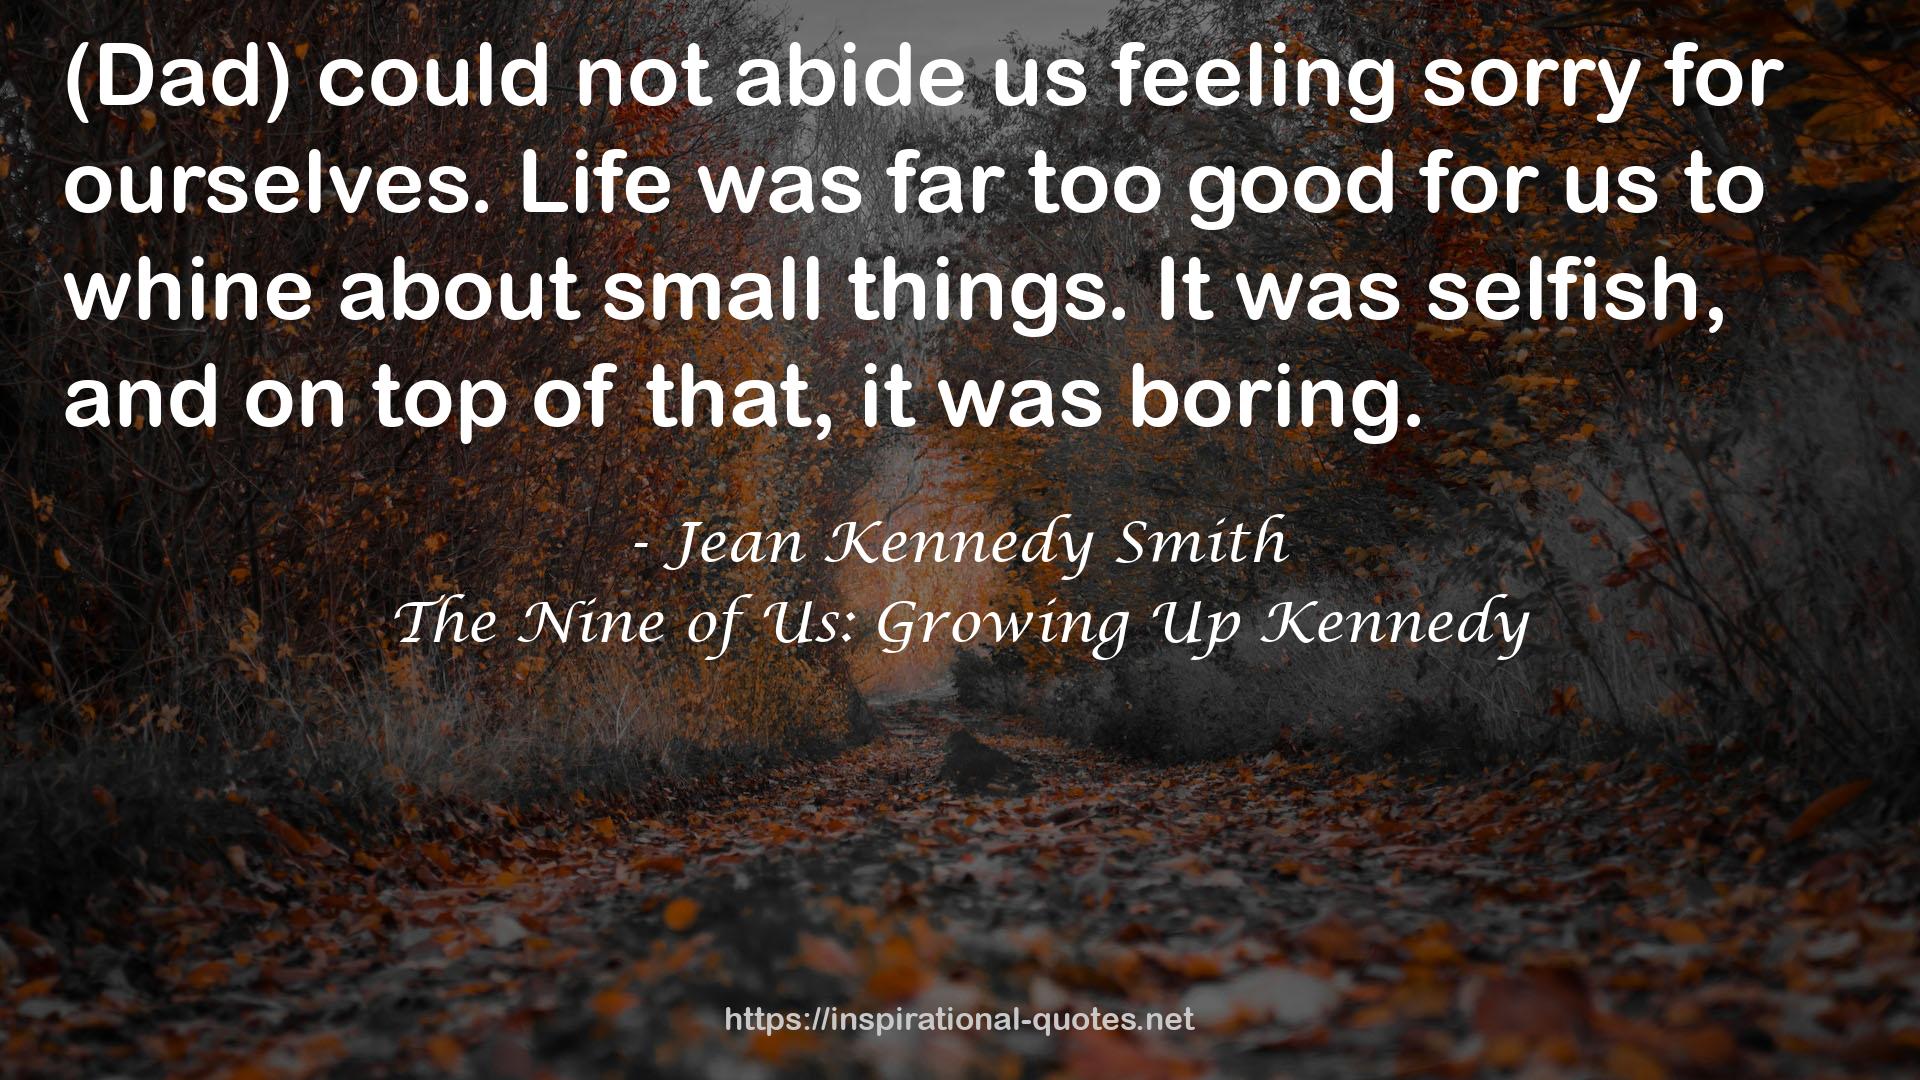 The Nine of Us: Growing Up Kennedy QUOTES